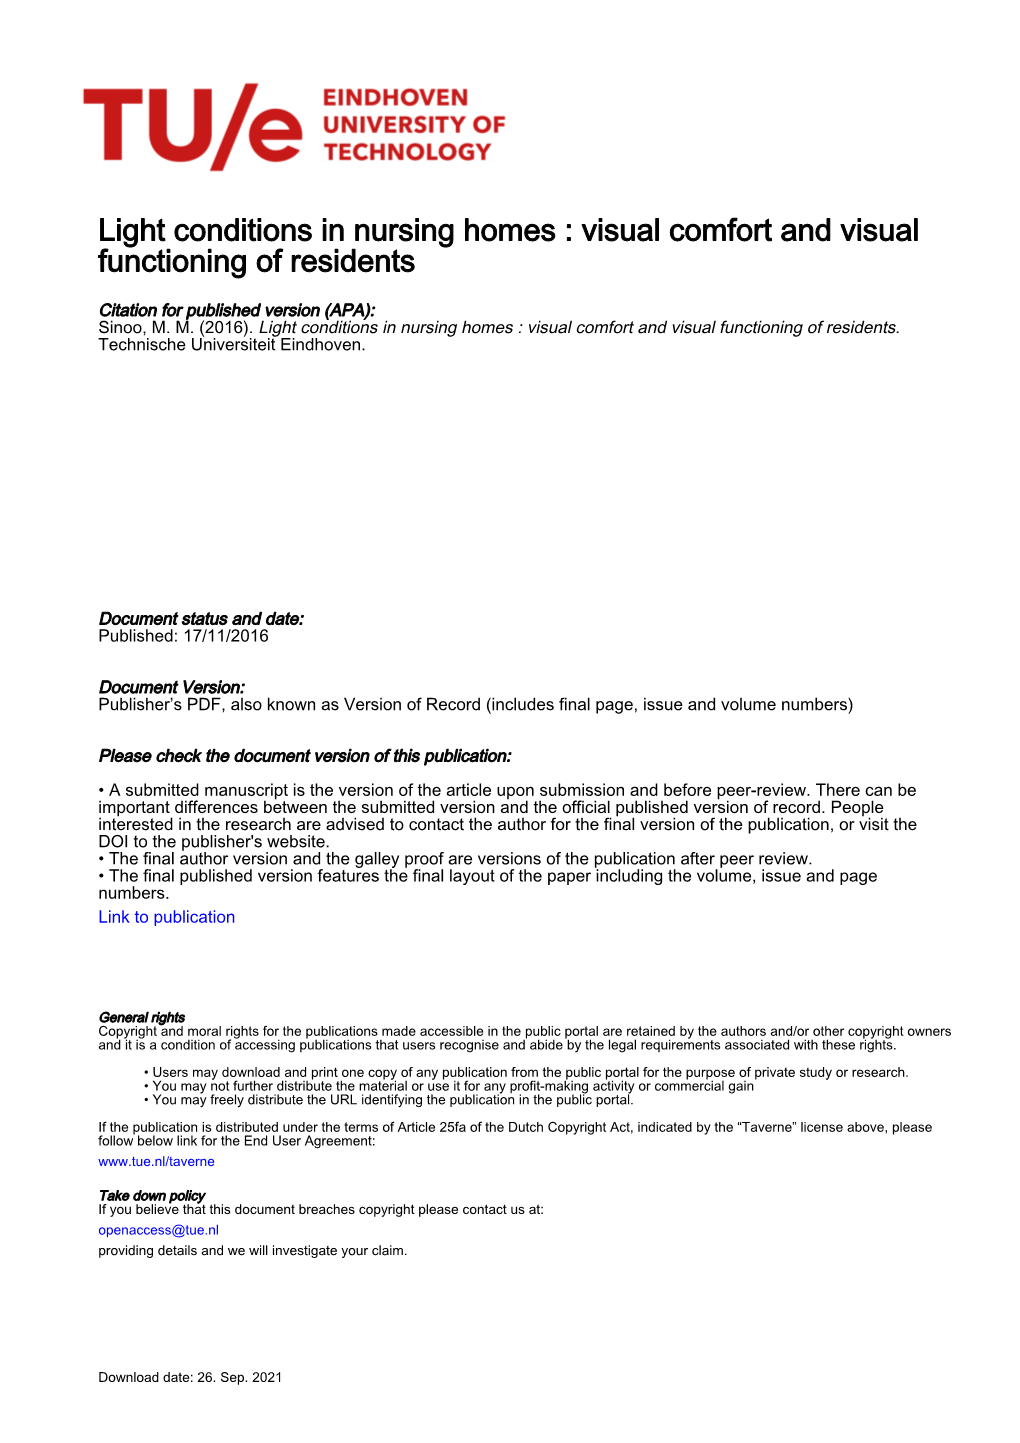 Light Conditions in Nursing Homes : Visual Comfort and Visual Functioning of Residents